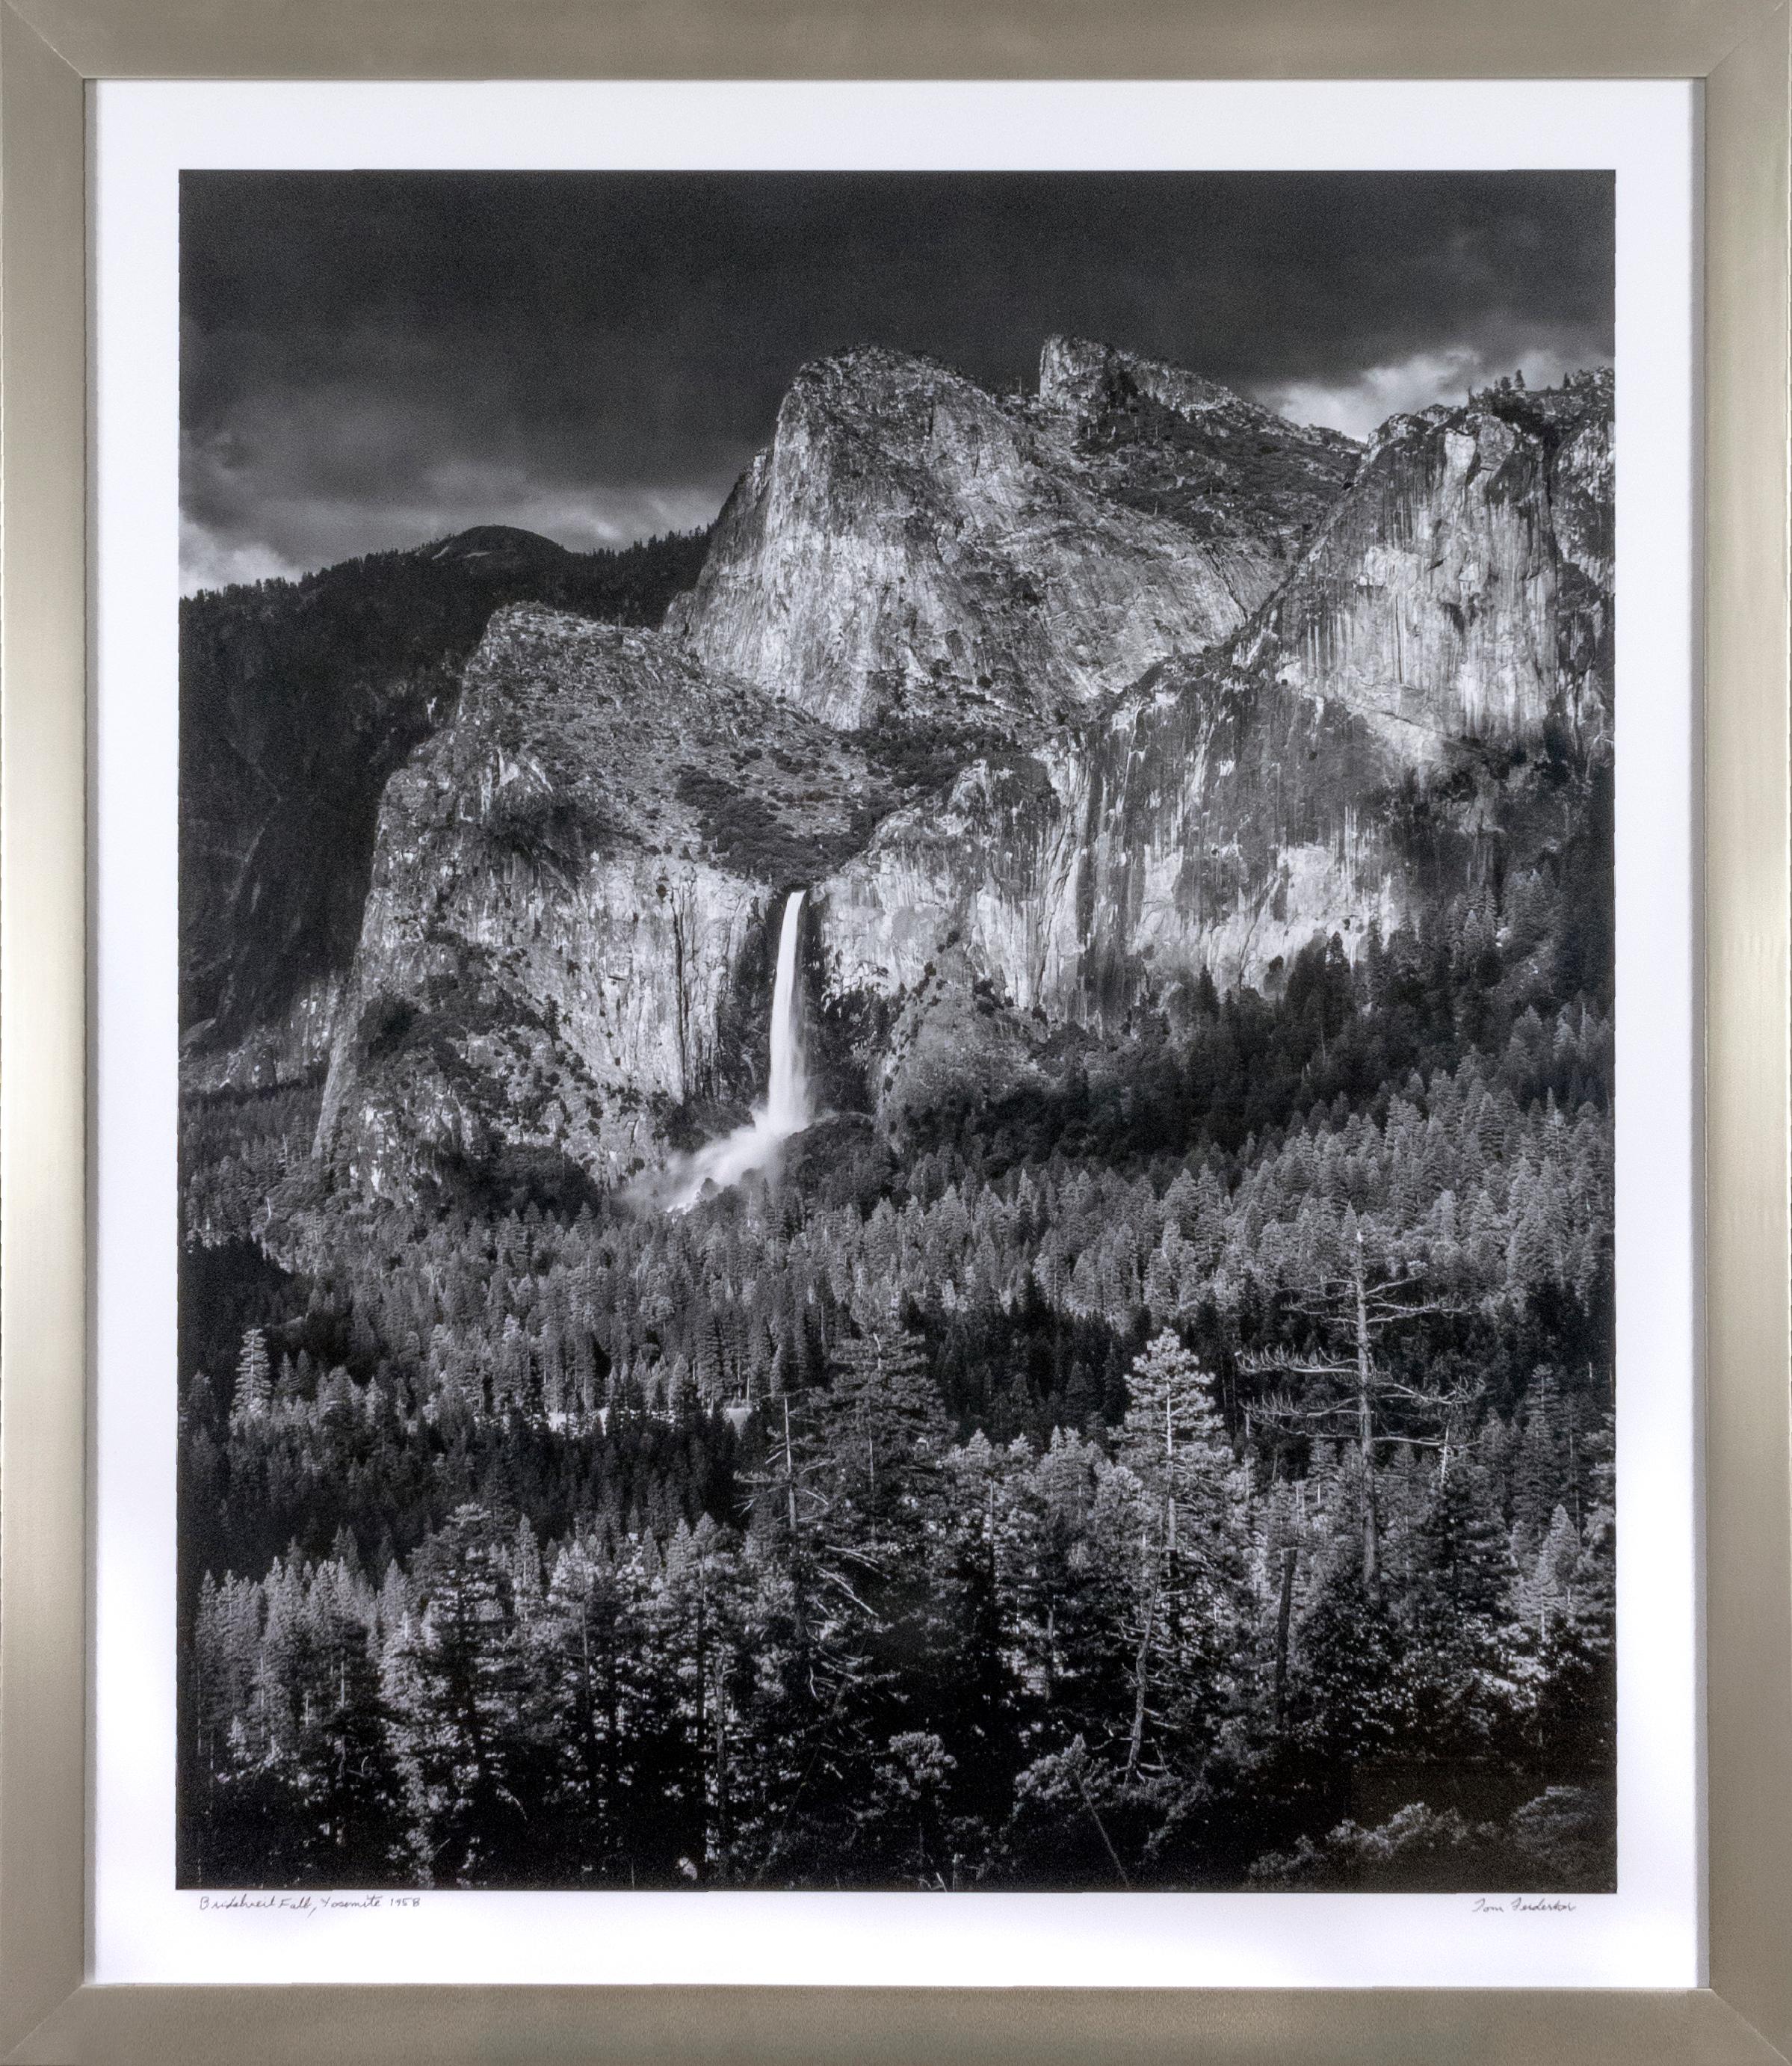 "Bridalveil Fall, Yosemite" is an original black and white archival pigment print using the original photograph taken in 1958. This is signed by the artist Thomas Ferderbar in the lower right and titled on the lower left using silver sharpie. 
This